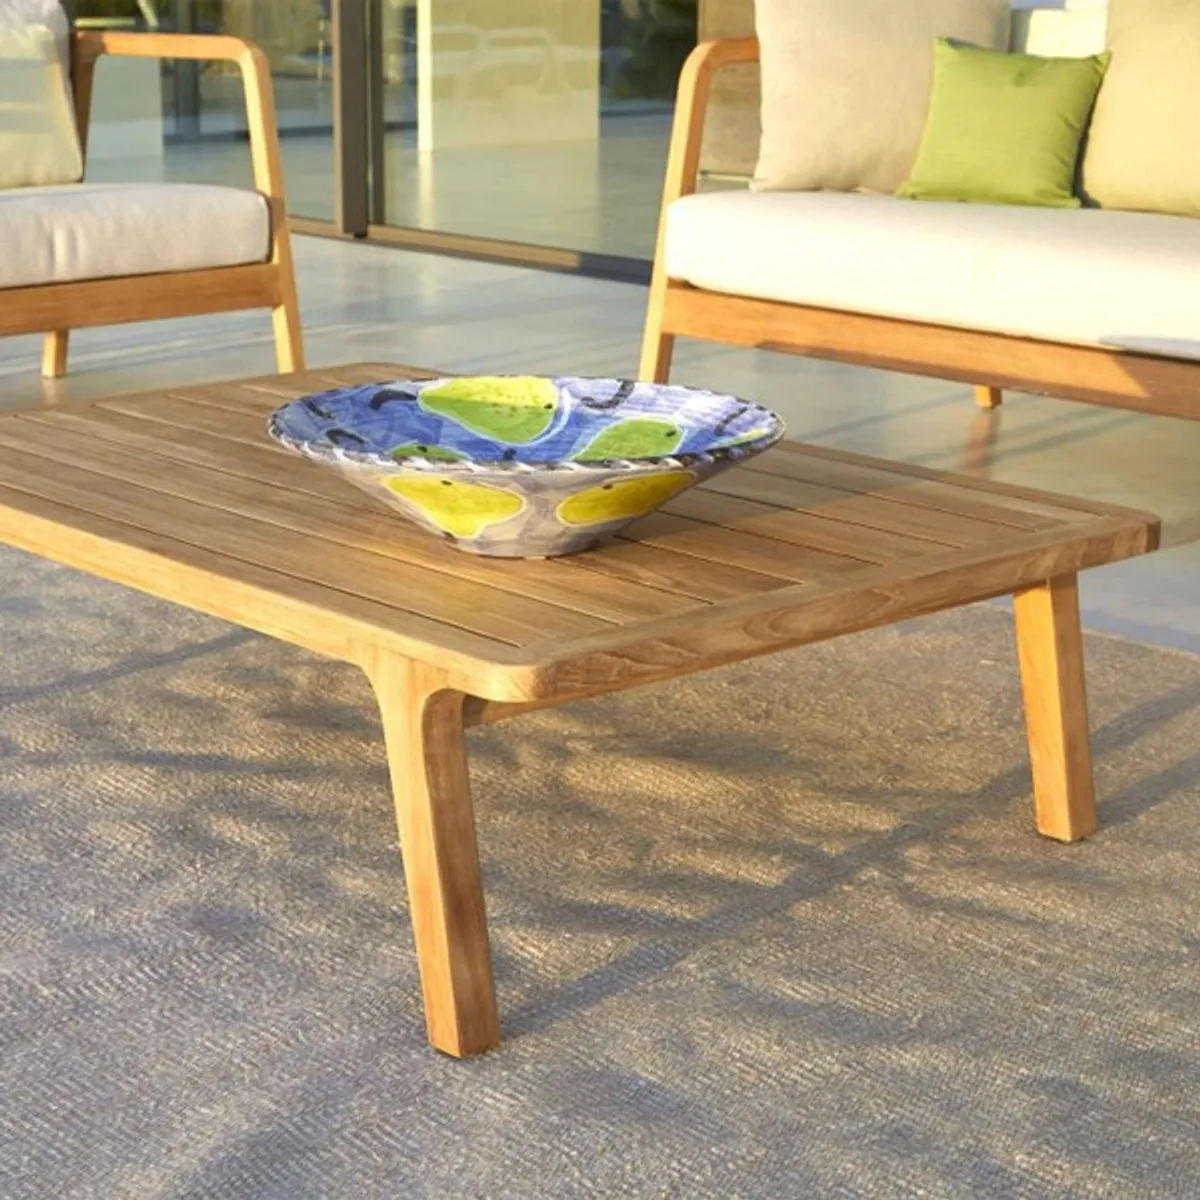 Carnelia small coffee table Inside Out Contracts3